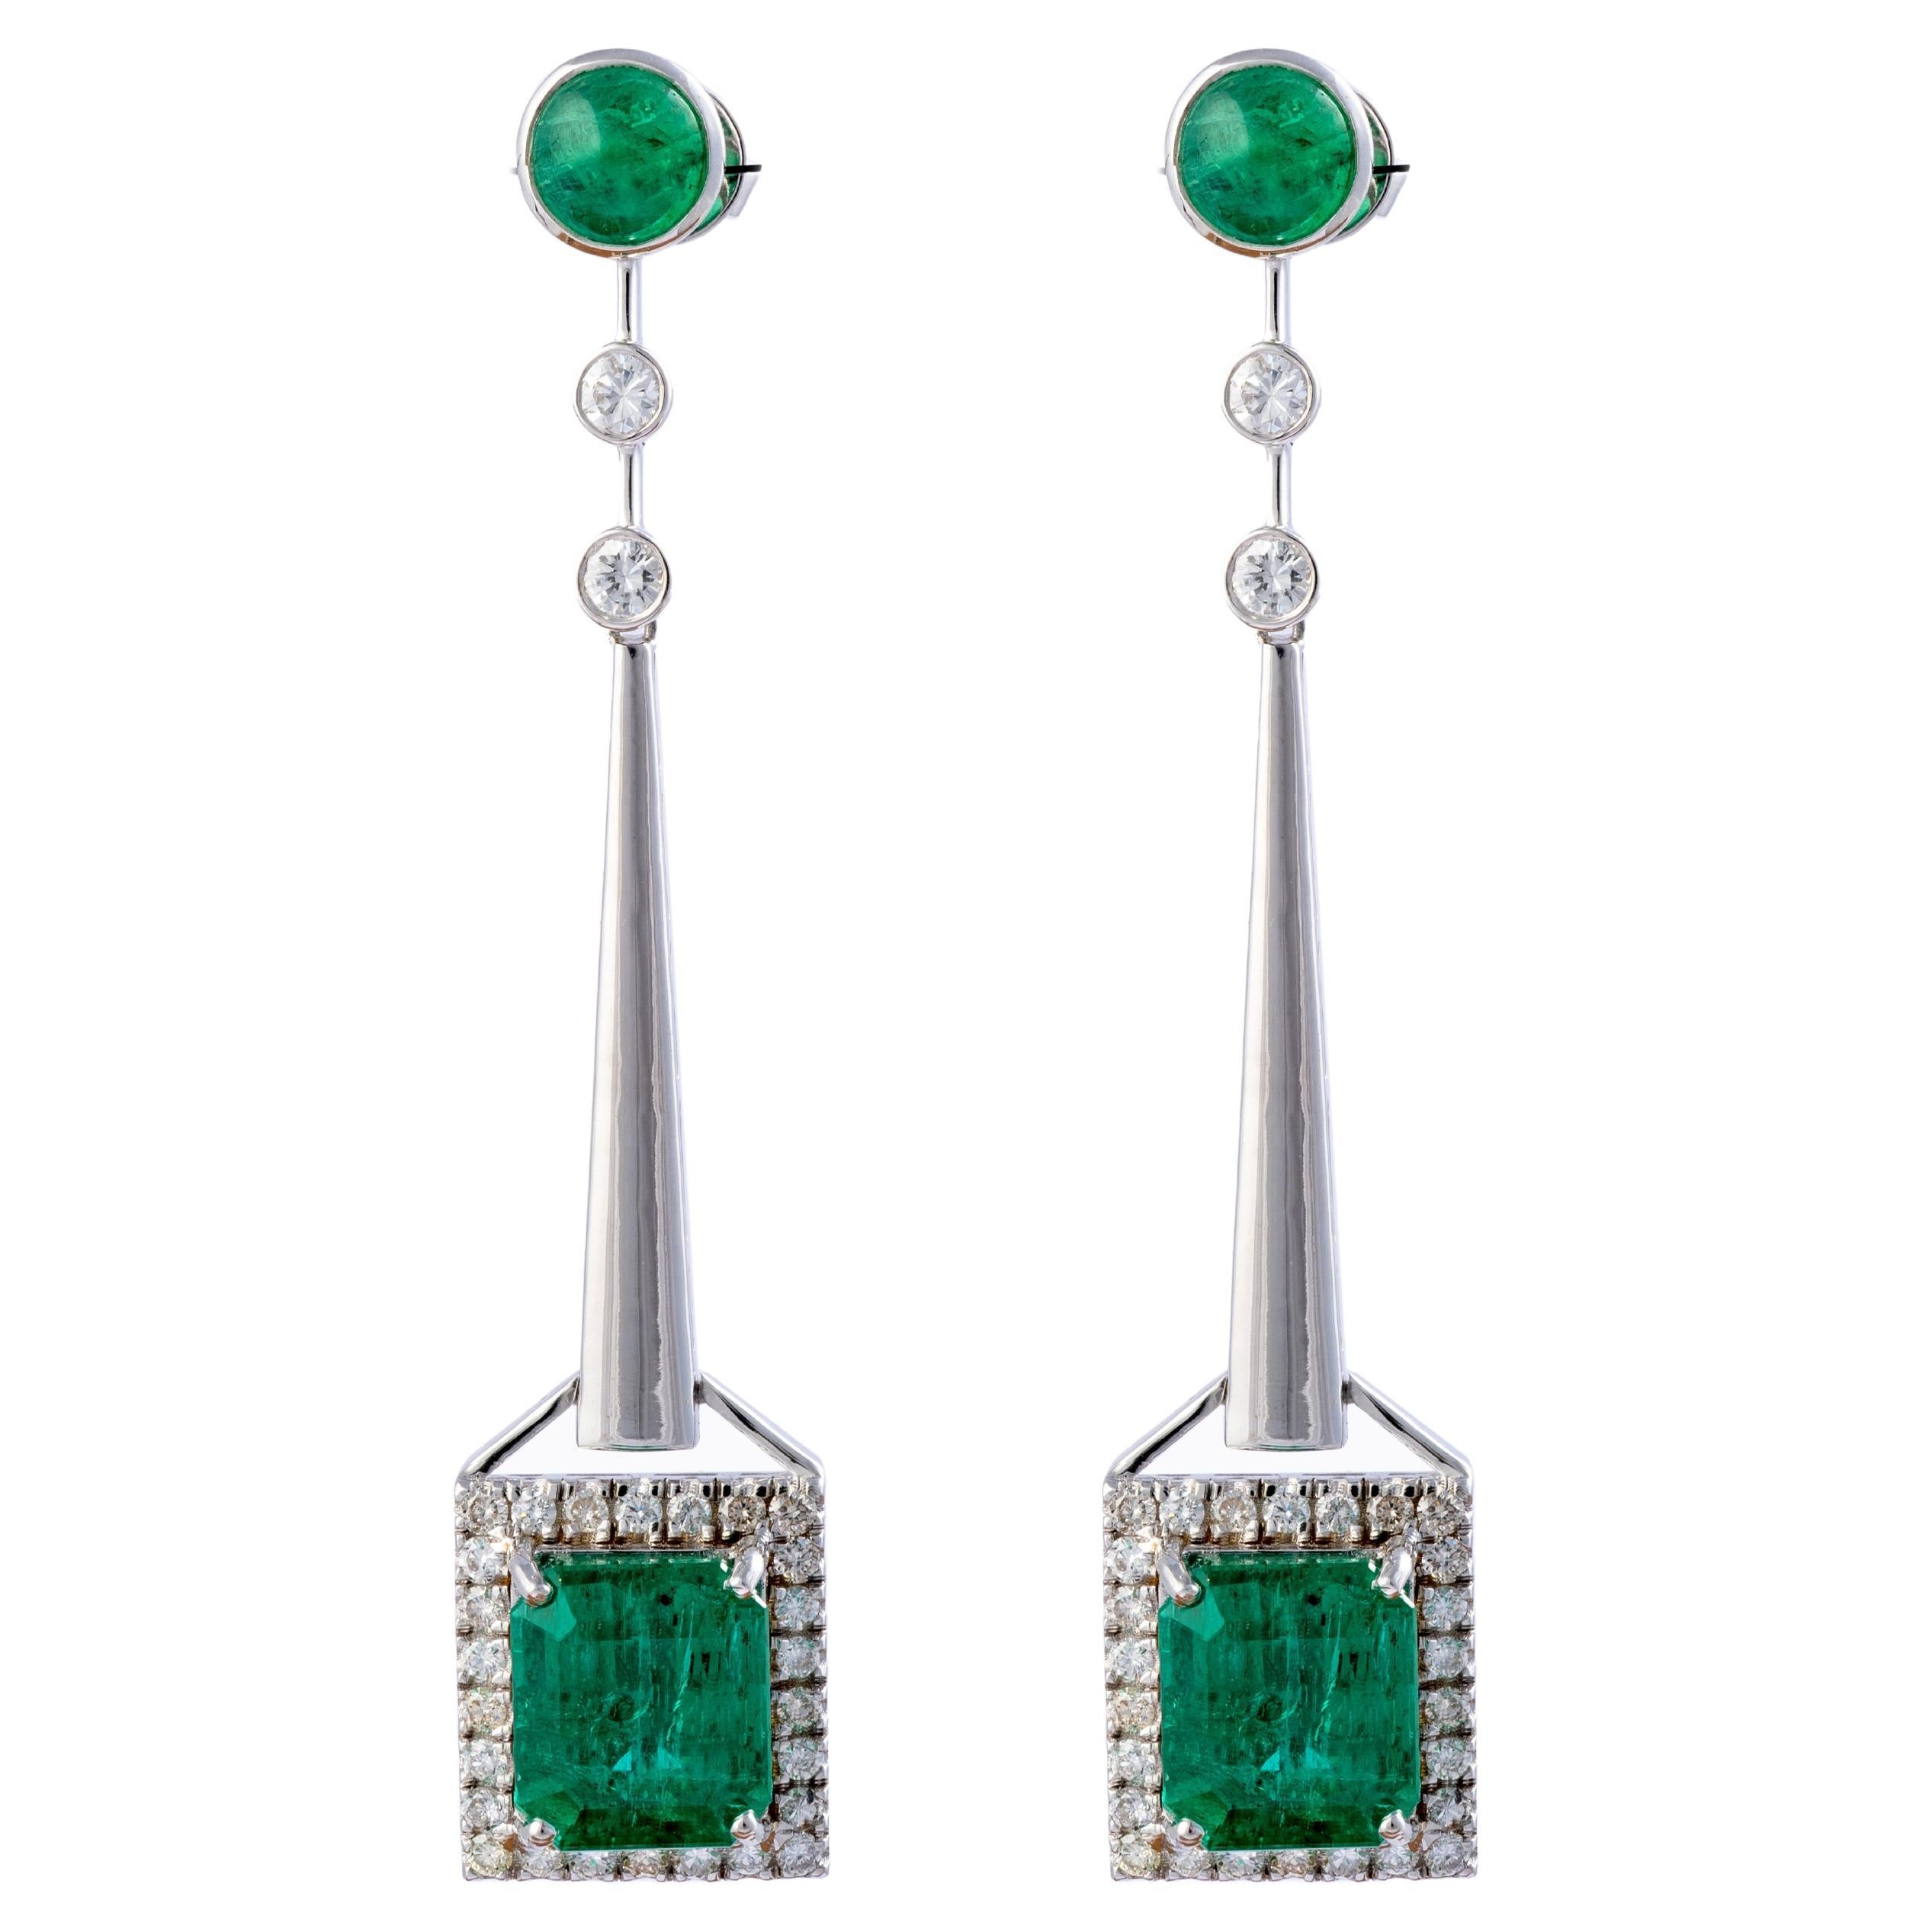 Natural Zambian Emerald 10.52cts  with Diamonds 1.32cts earring and 14k Gold